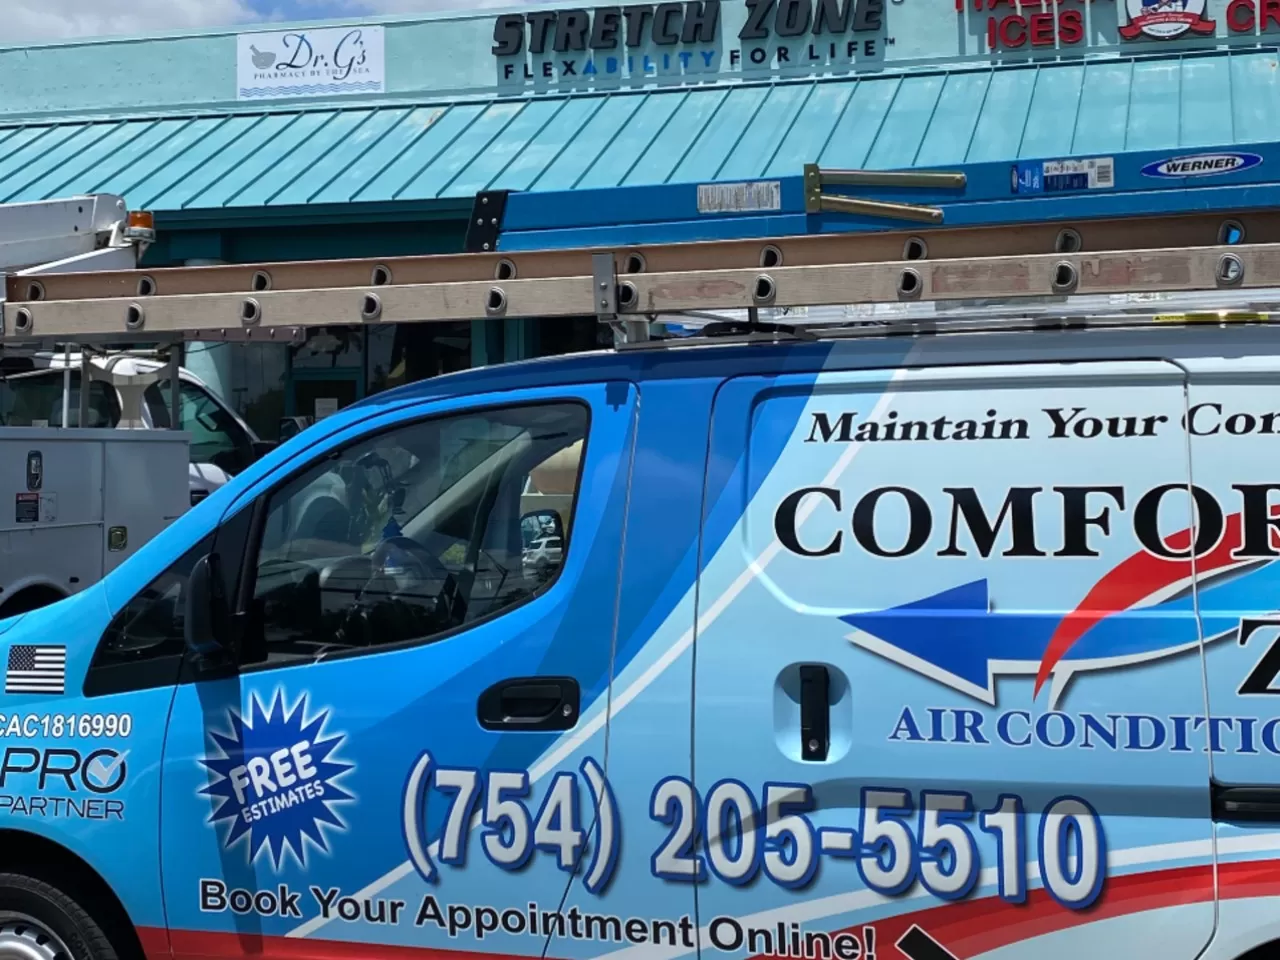 Commercial Air Conditioning - Keeping Your Clients Comfortable And Happy